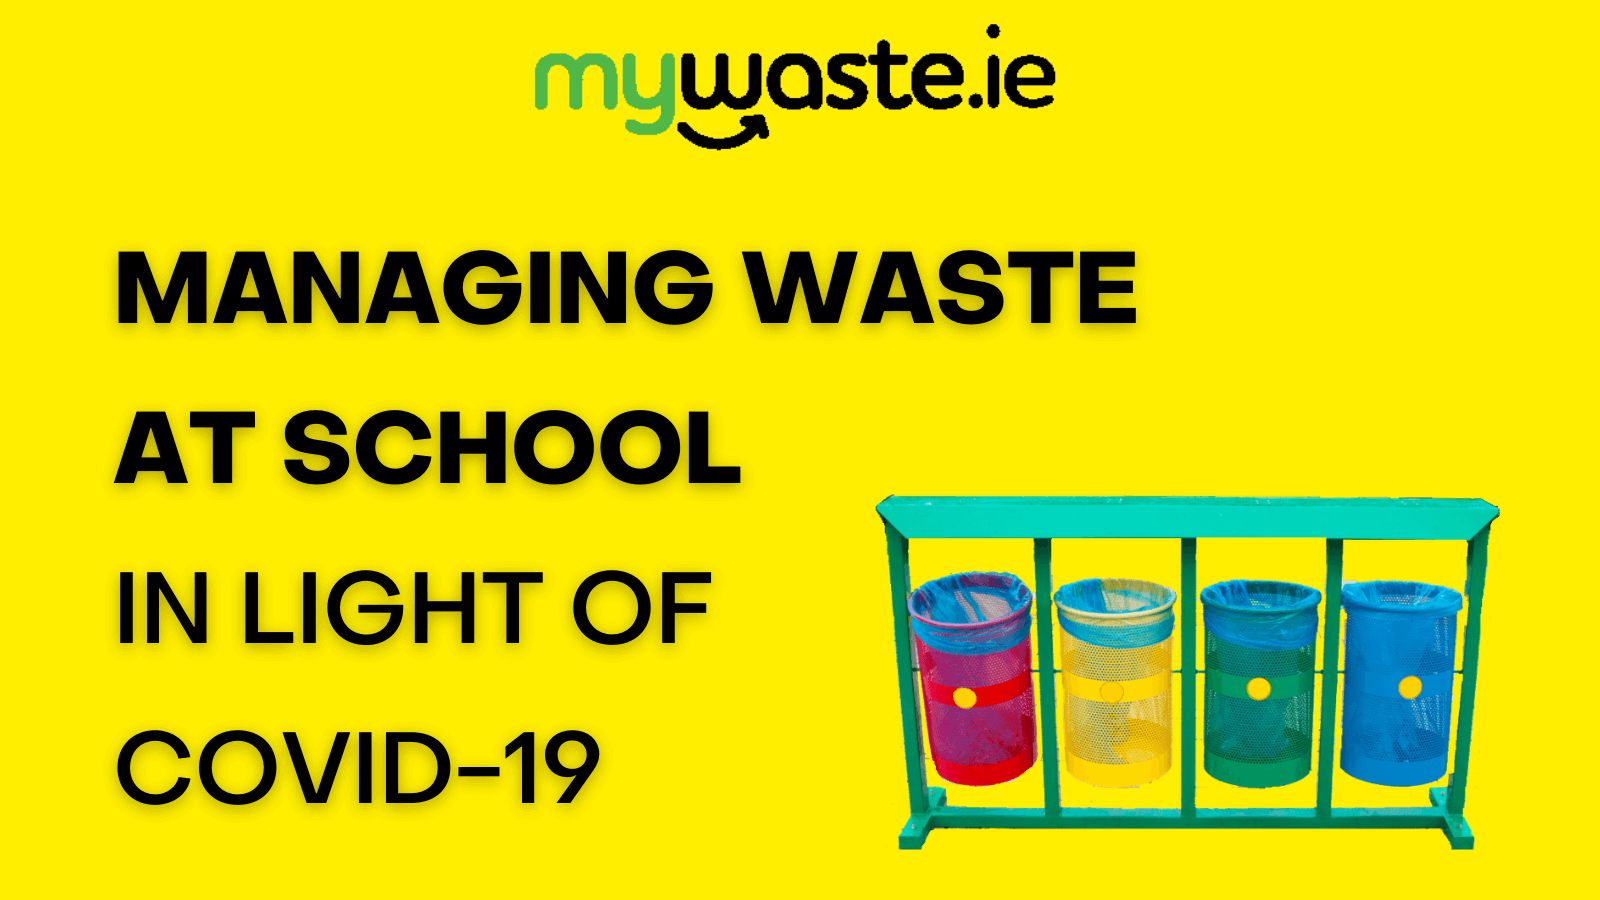 Managing Waste at School in Light of COVID-19